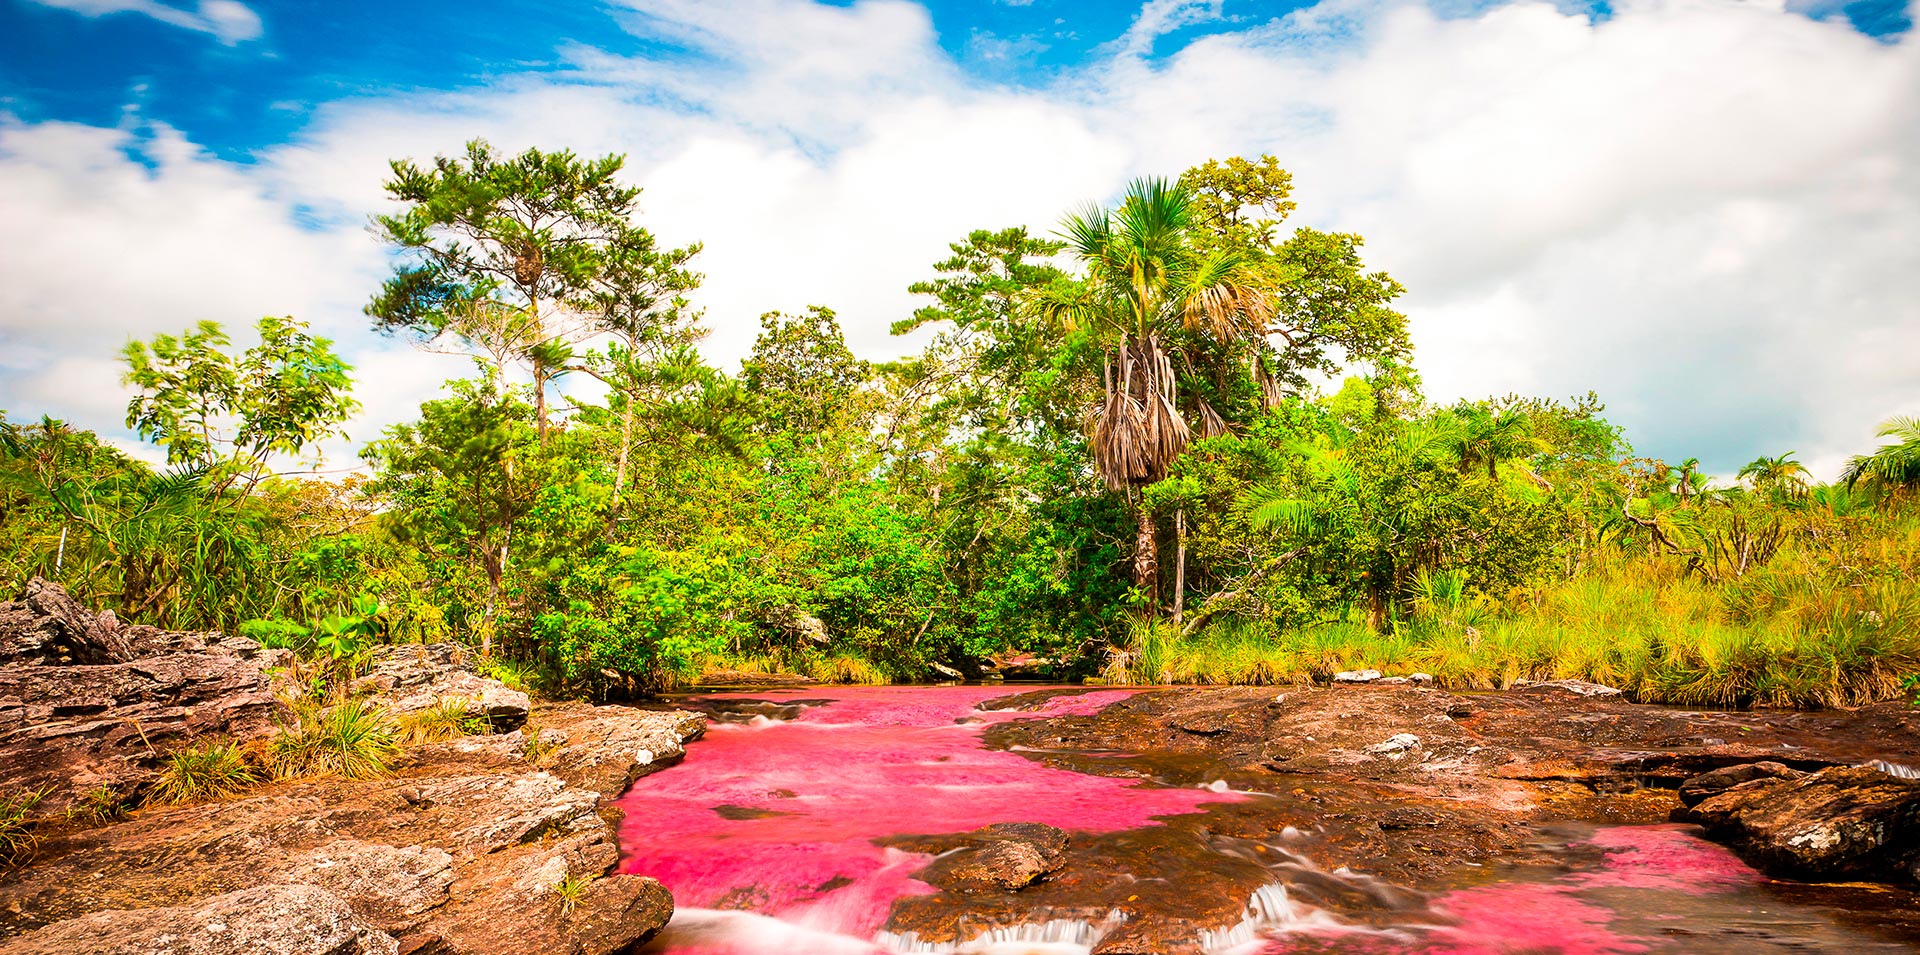 Colombia's River of the Seven Colors in full bloom